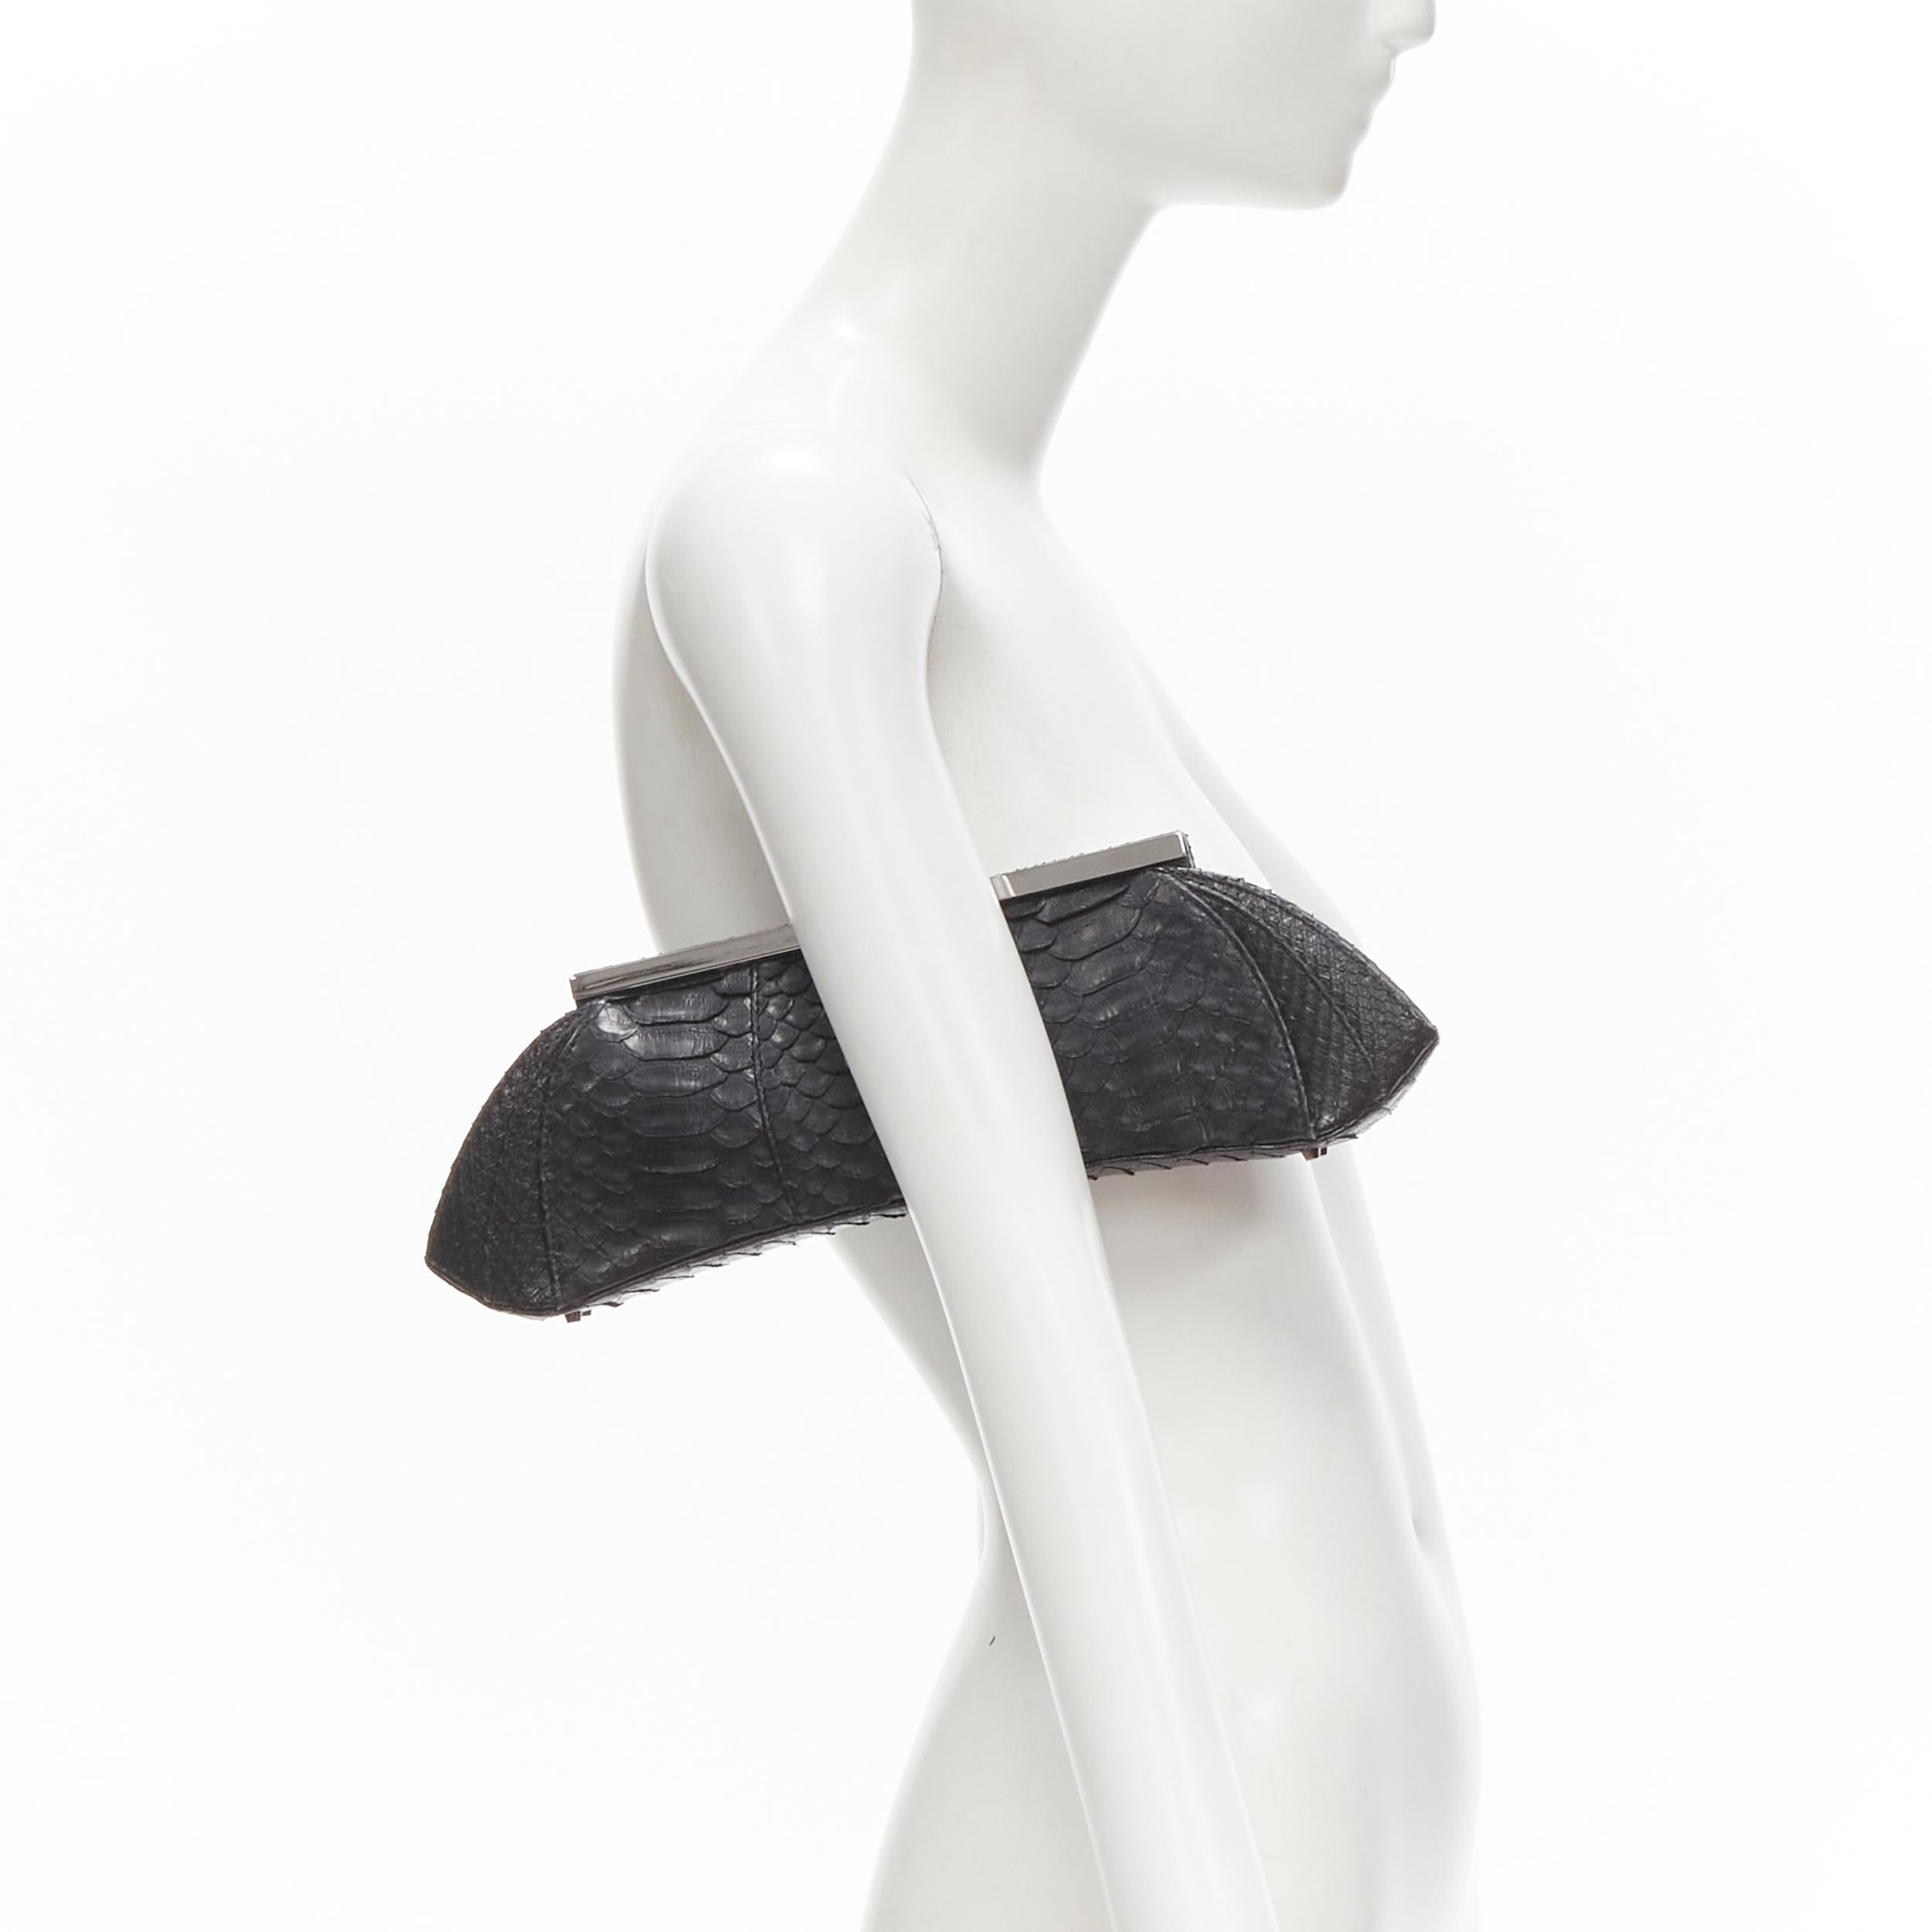 PHILIP TREACY black scaled leather silver metal clasp evening clutch bag 
Reference: JACG/A00007 
Brand: Phillip Treacy 
Material: Leather 
Color: Black
Pattern: Solid 
Closure: Push lock 
Extra Detail: Scaled leather. Silver-tone hardware. Metal